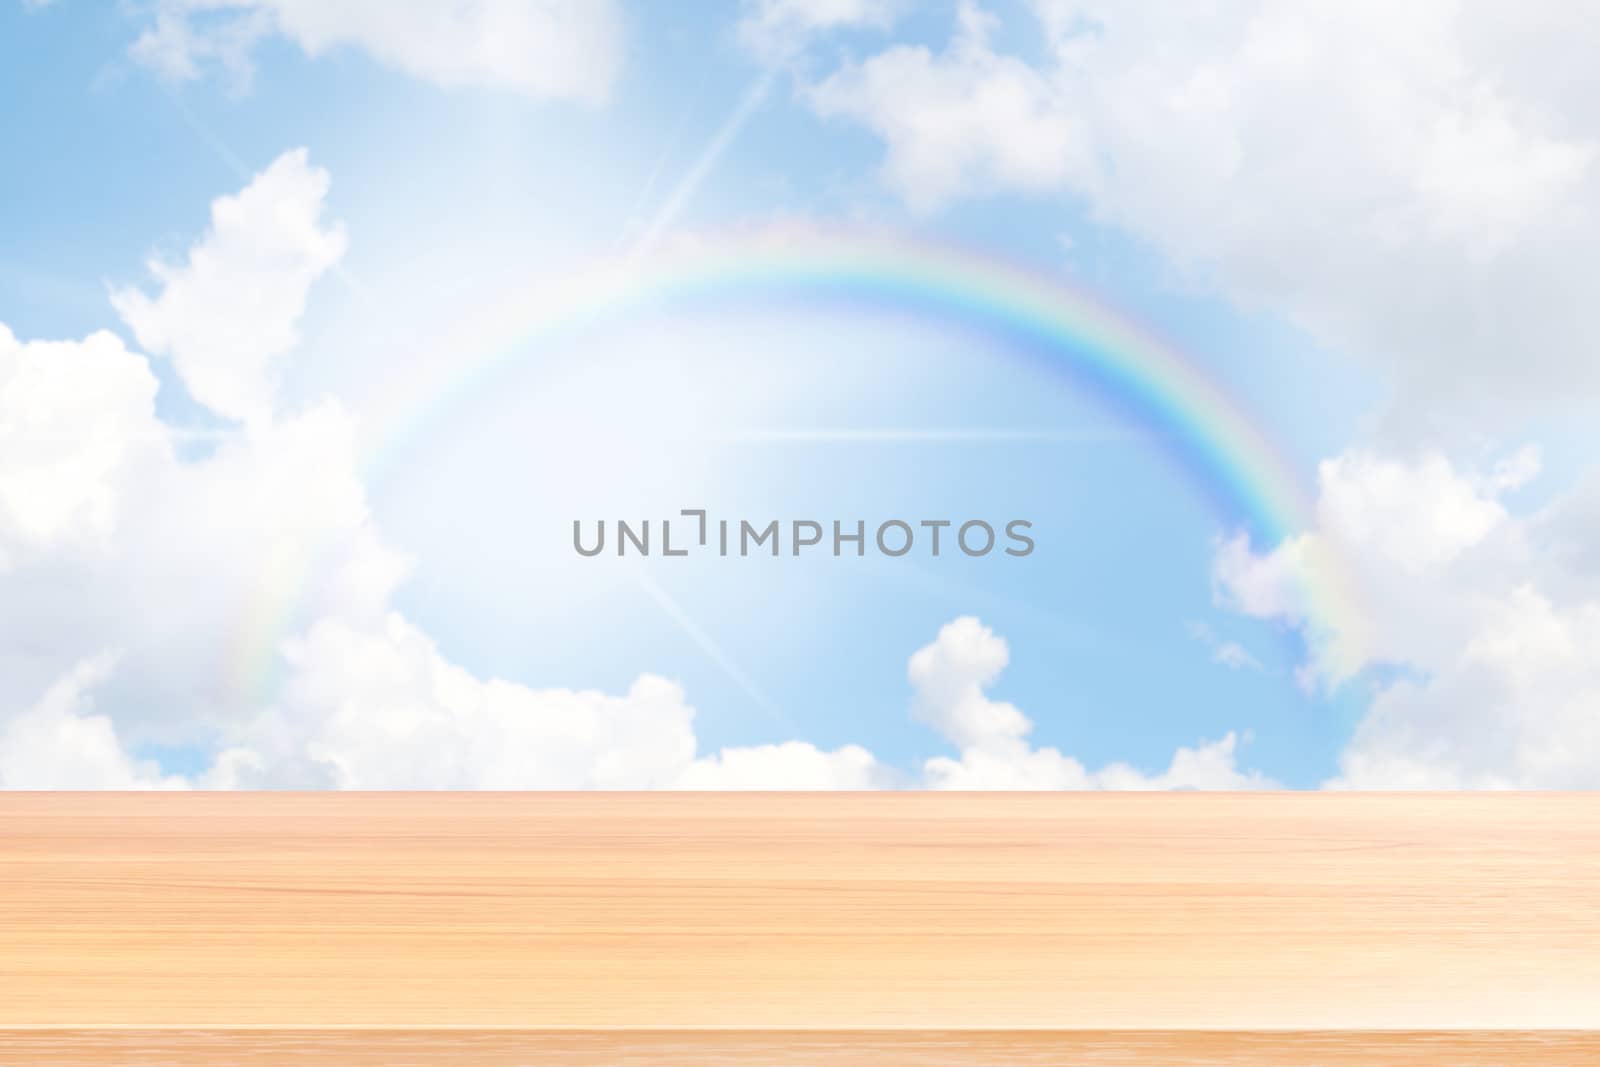 empty wood table floors on rainbow and blue sky background, wood table board empty front rainbows rings circle on sky, wooden plank blank over colorful rainbow in the sky for mock up display products